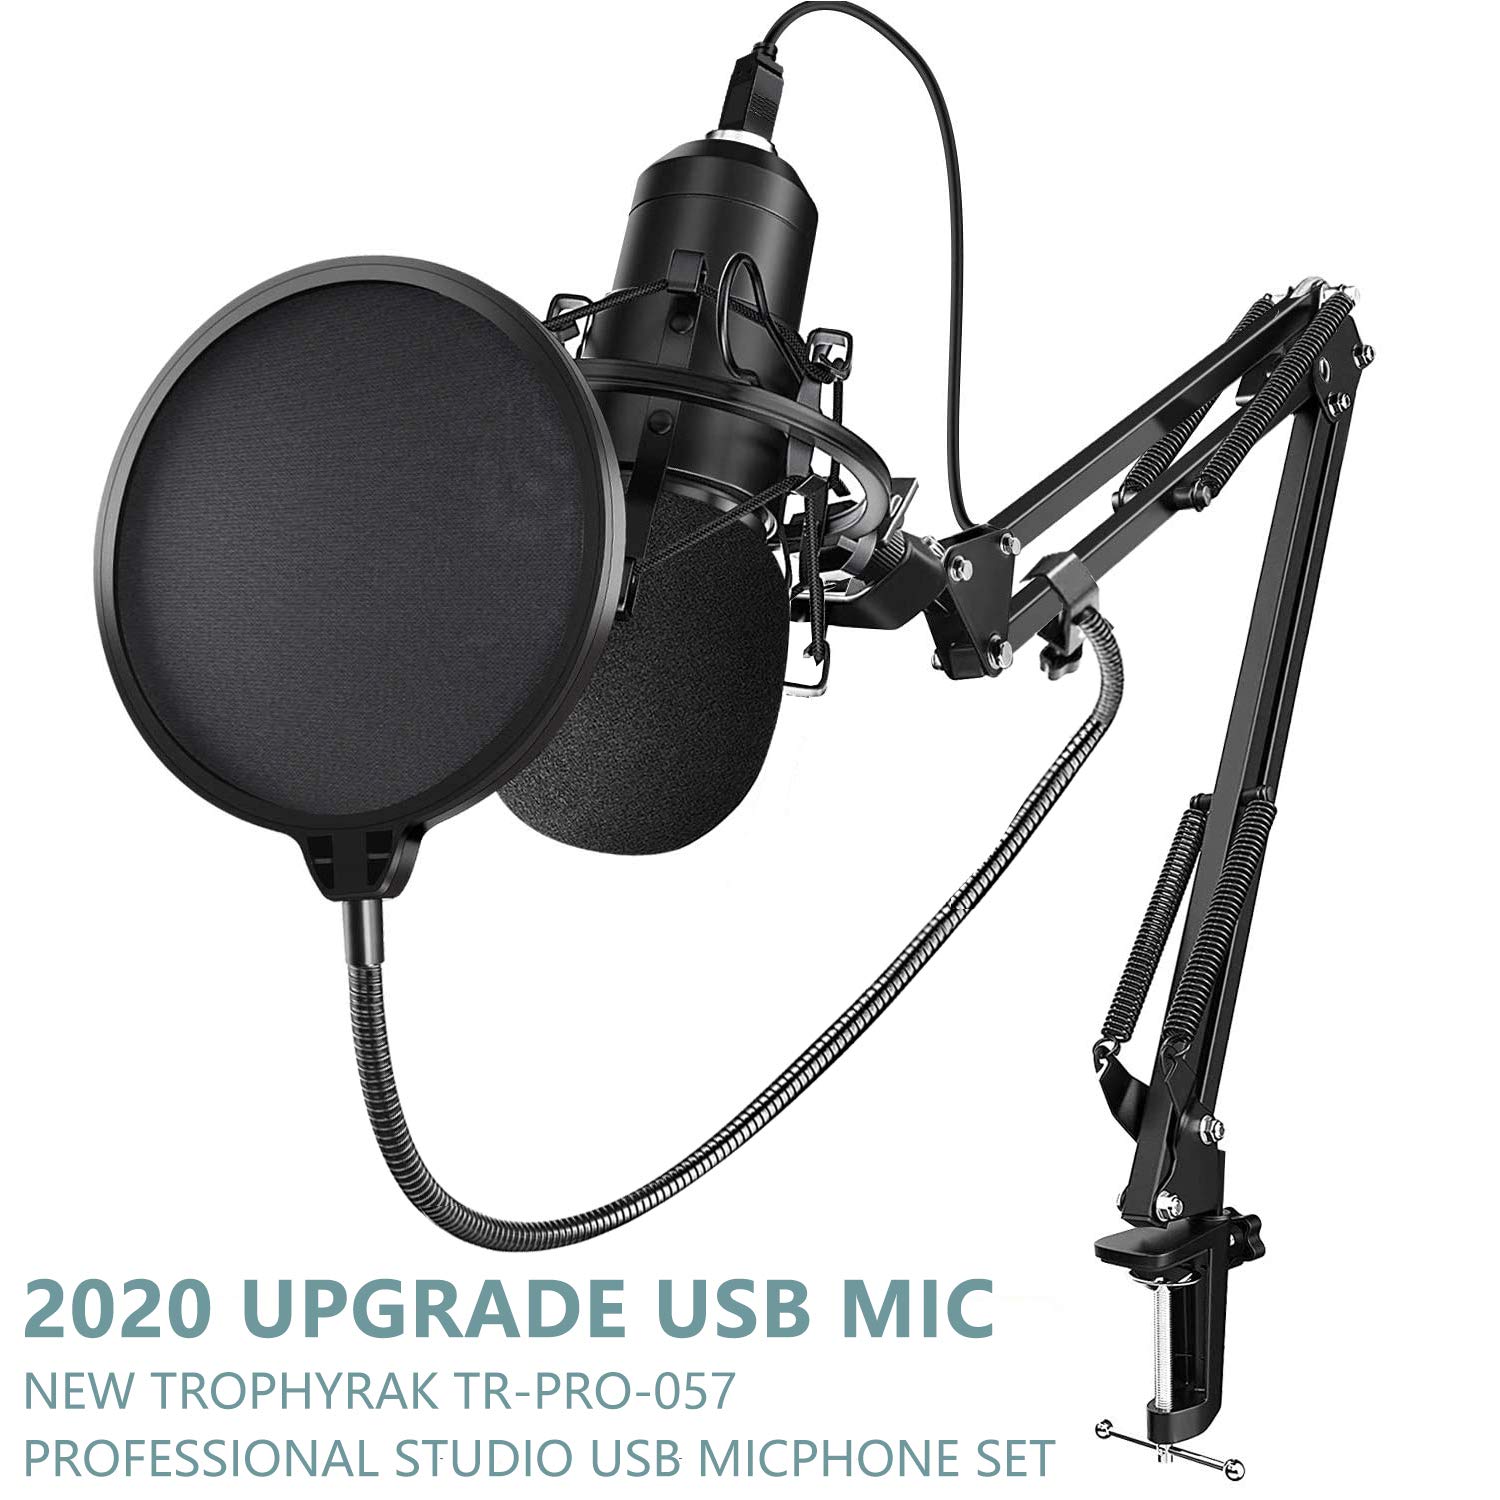 Upgraded USB Microphone for Computer, Mic for Gaming, Podcast, Live Streaming, YouTube on PC, Mic Studio Bundle with Adjustment Arm Stand, Fits for Windows & Mac PC, Plug & Play Design, Black